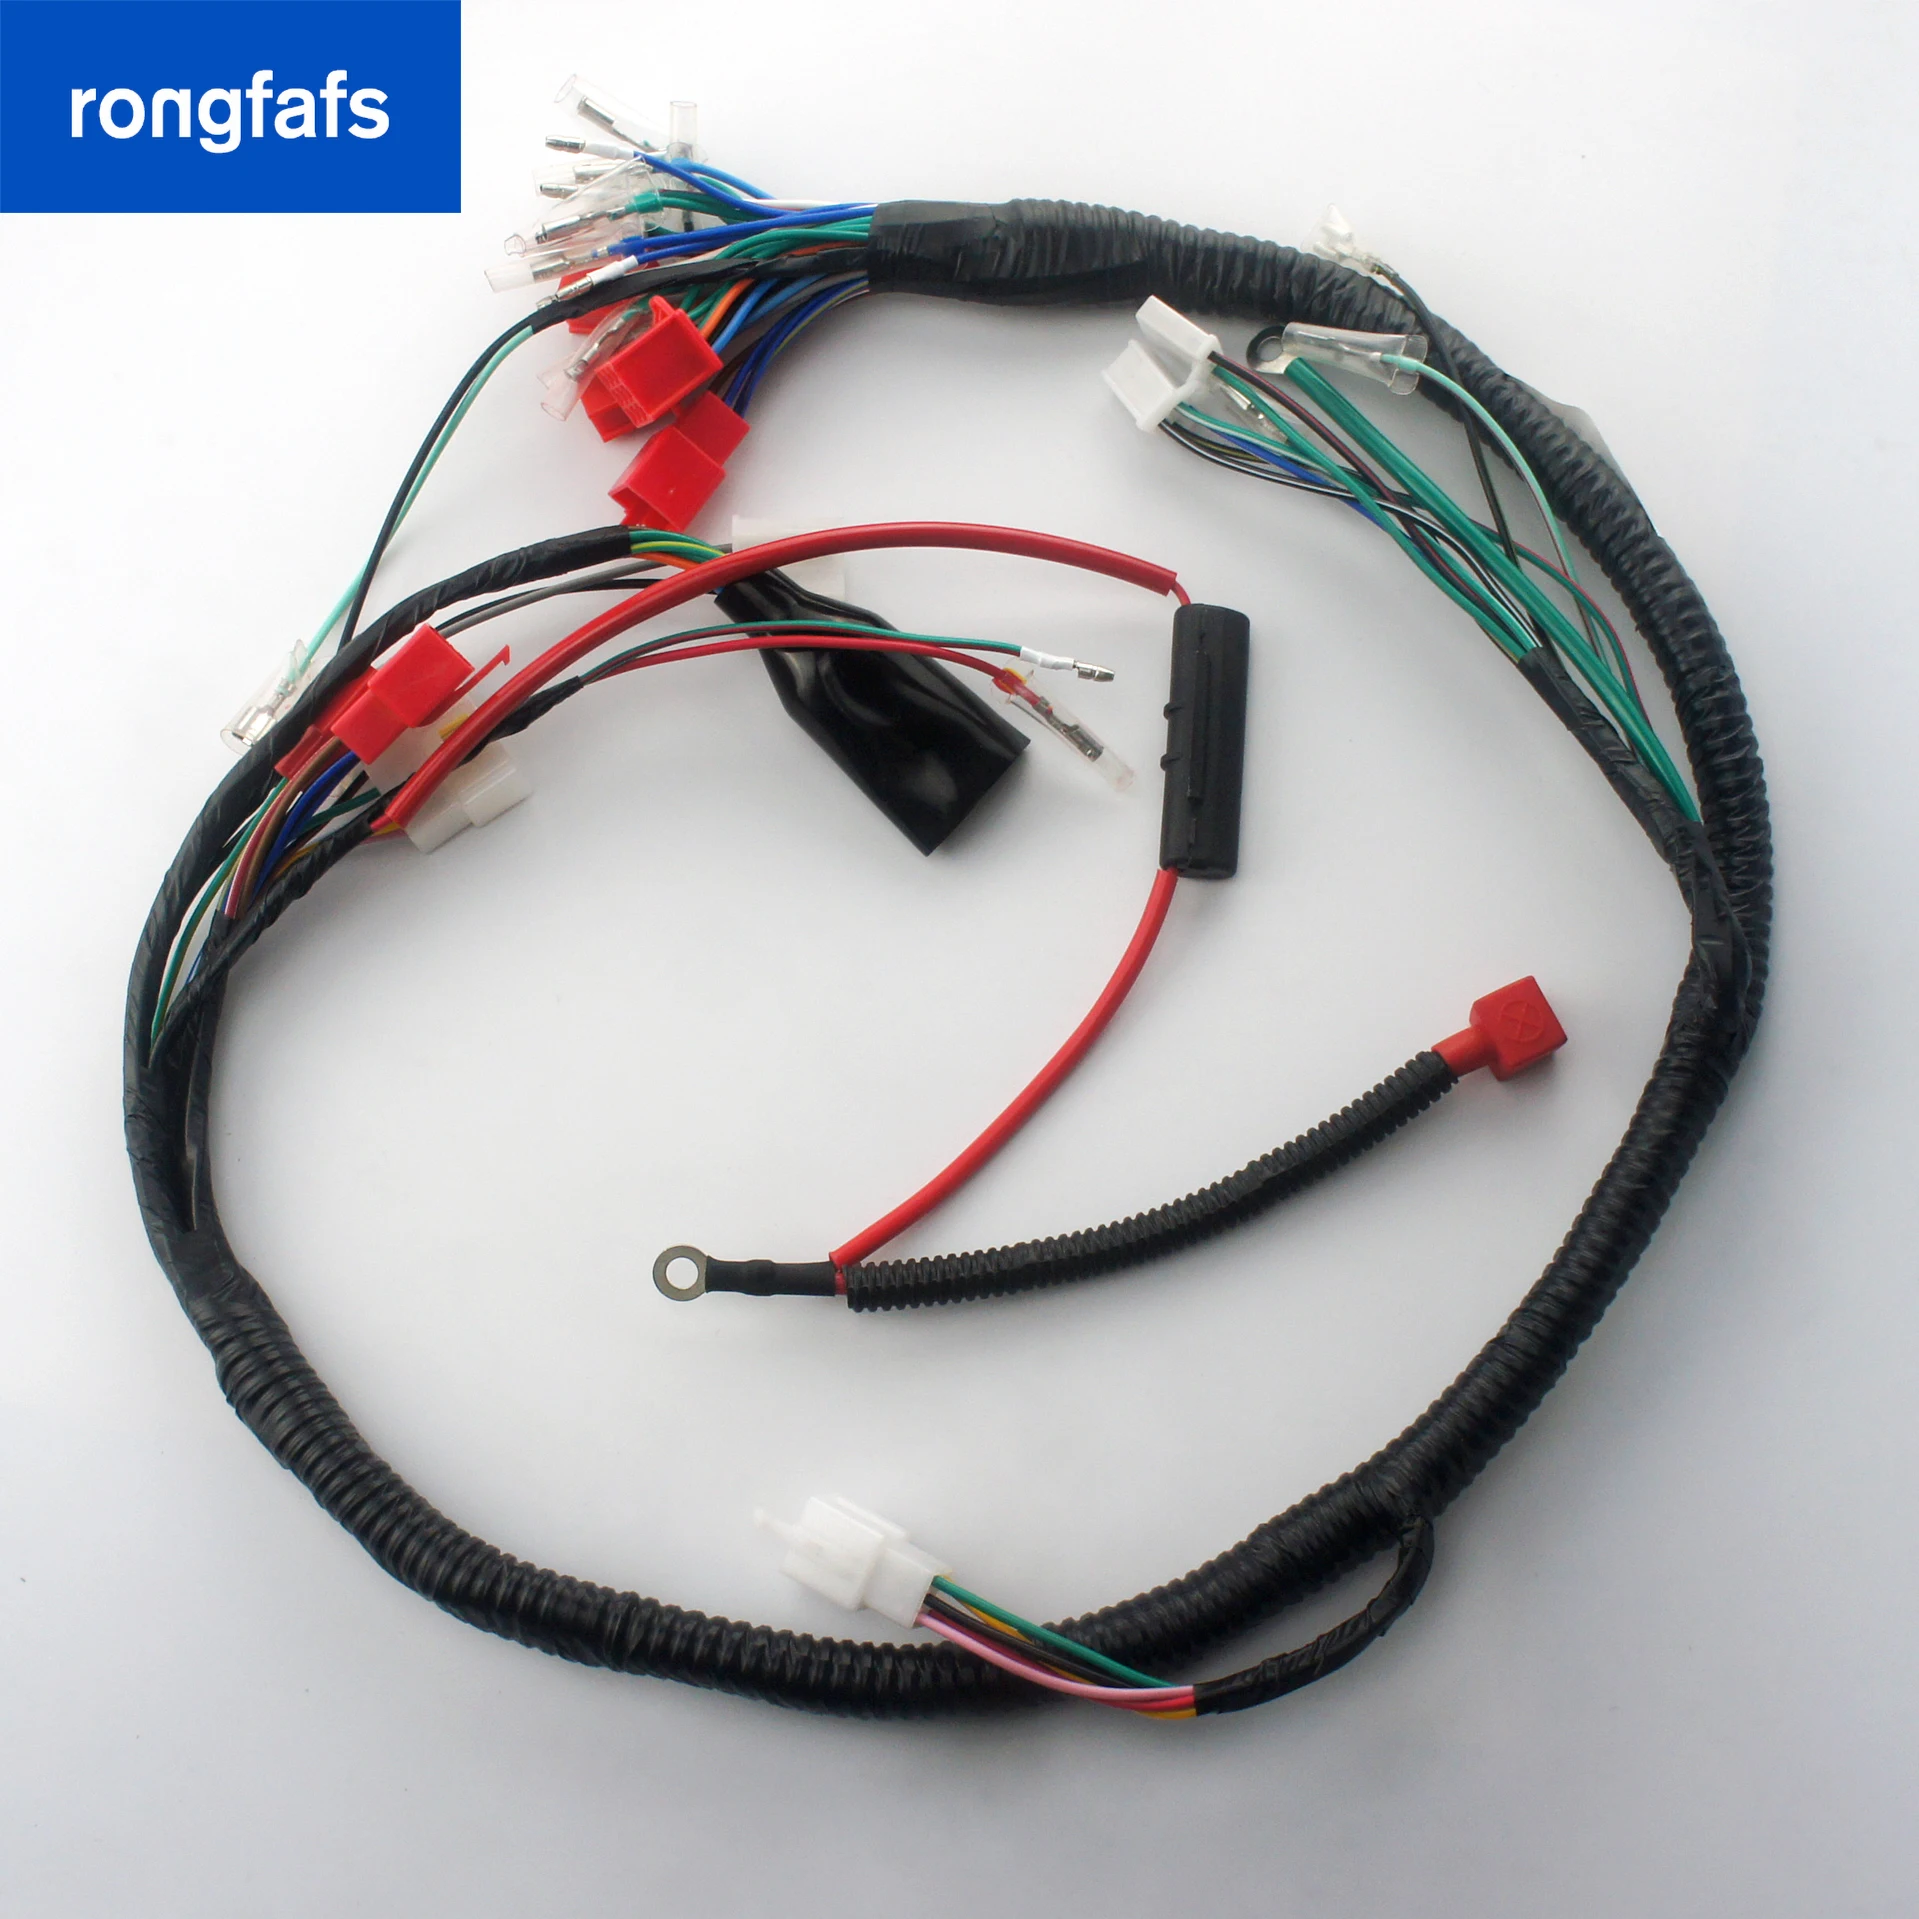 

Motorcycle Accessories Harness Wire ZJ-125cc & CG-125 with 5 Gear Shift Whole Body Wiring Electric Cables Harness Wires